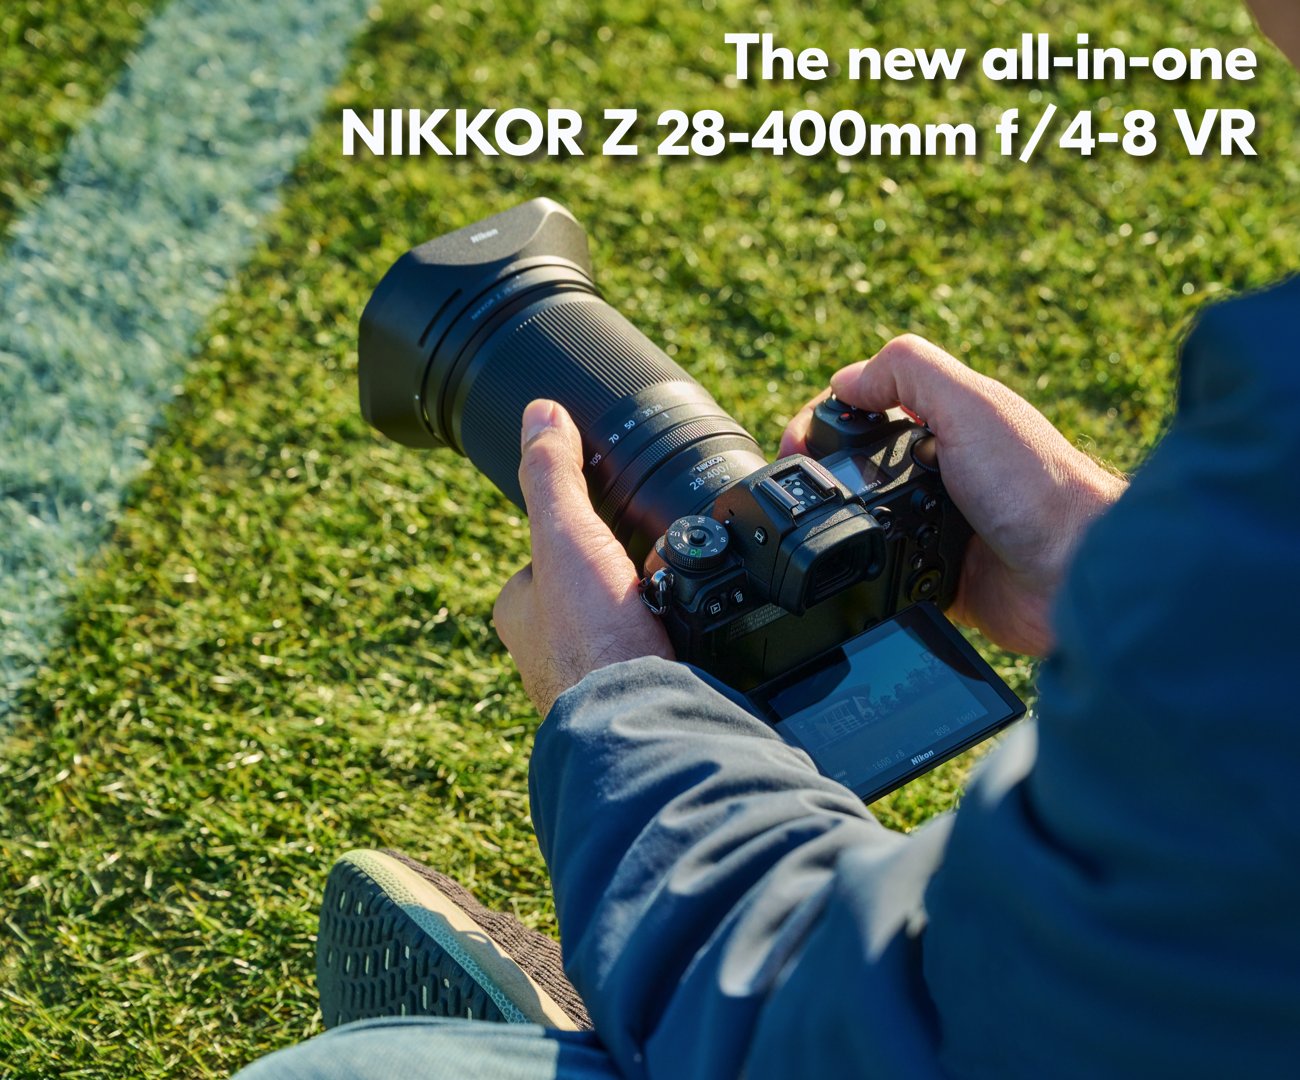 The rumored Nikon NIKKOR Z 28-400mm f/4-8 VR lens is now officially announced